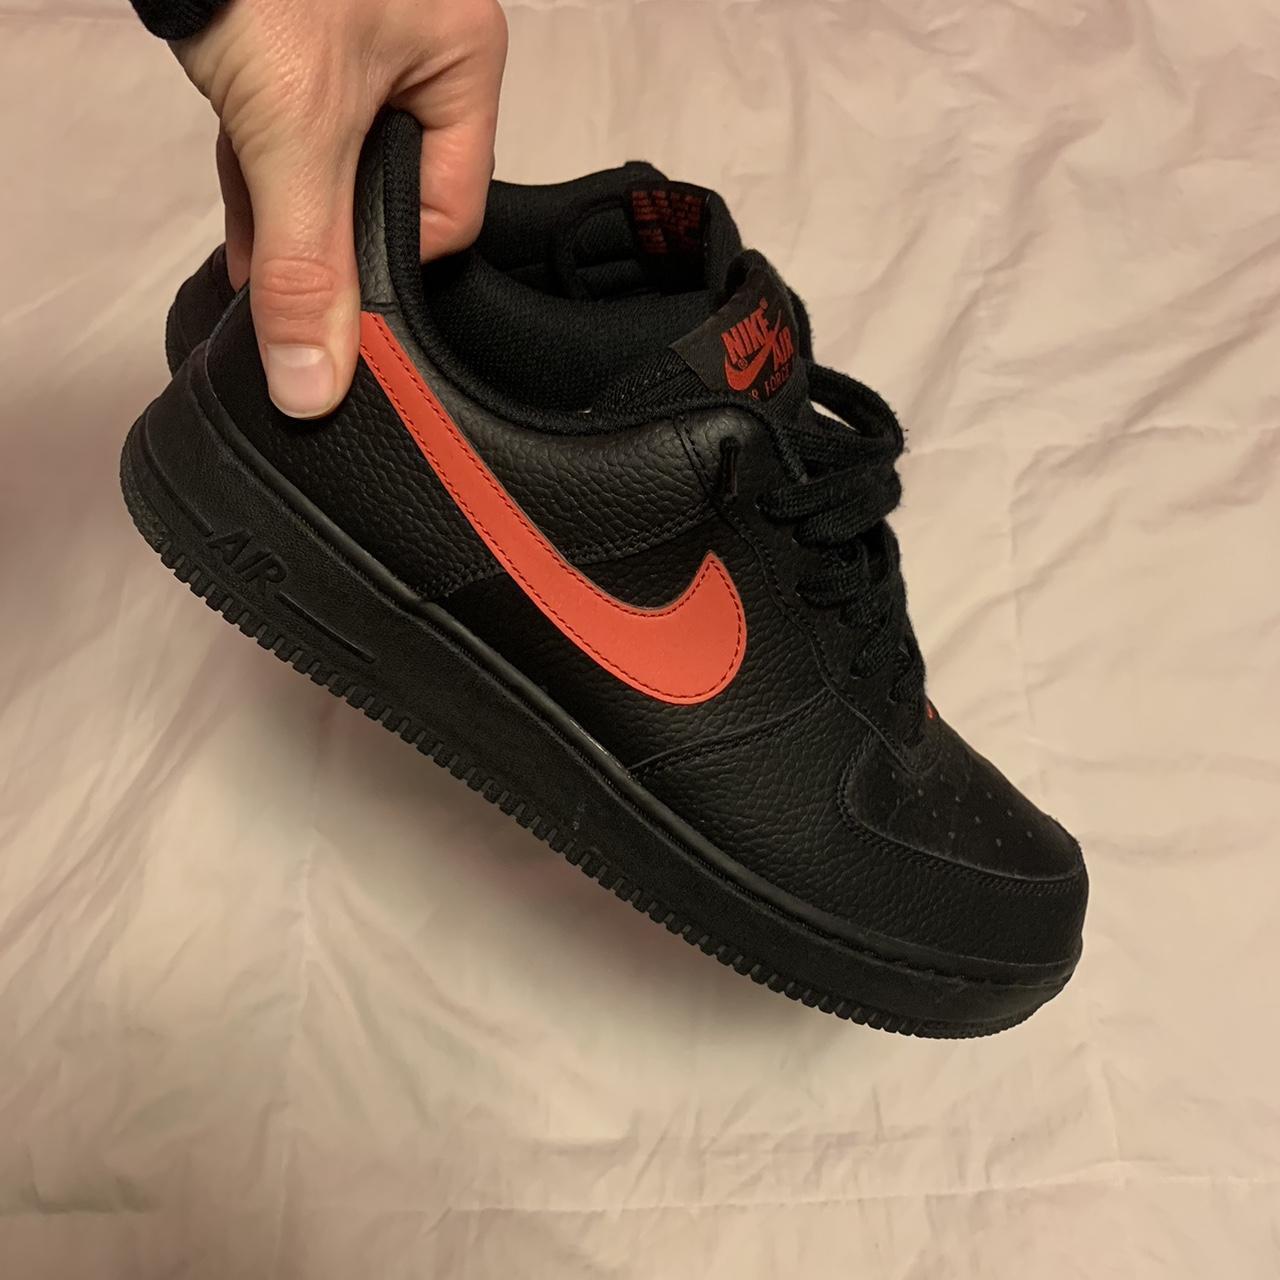 NBA X AIR FORCE 1 '07 LV8 'RED' ♥️ THESE ARE SO - Depop